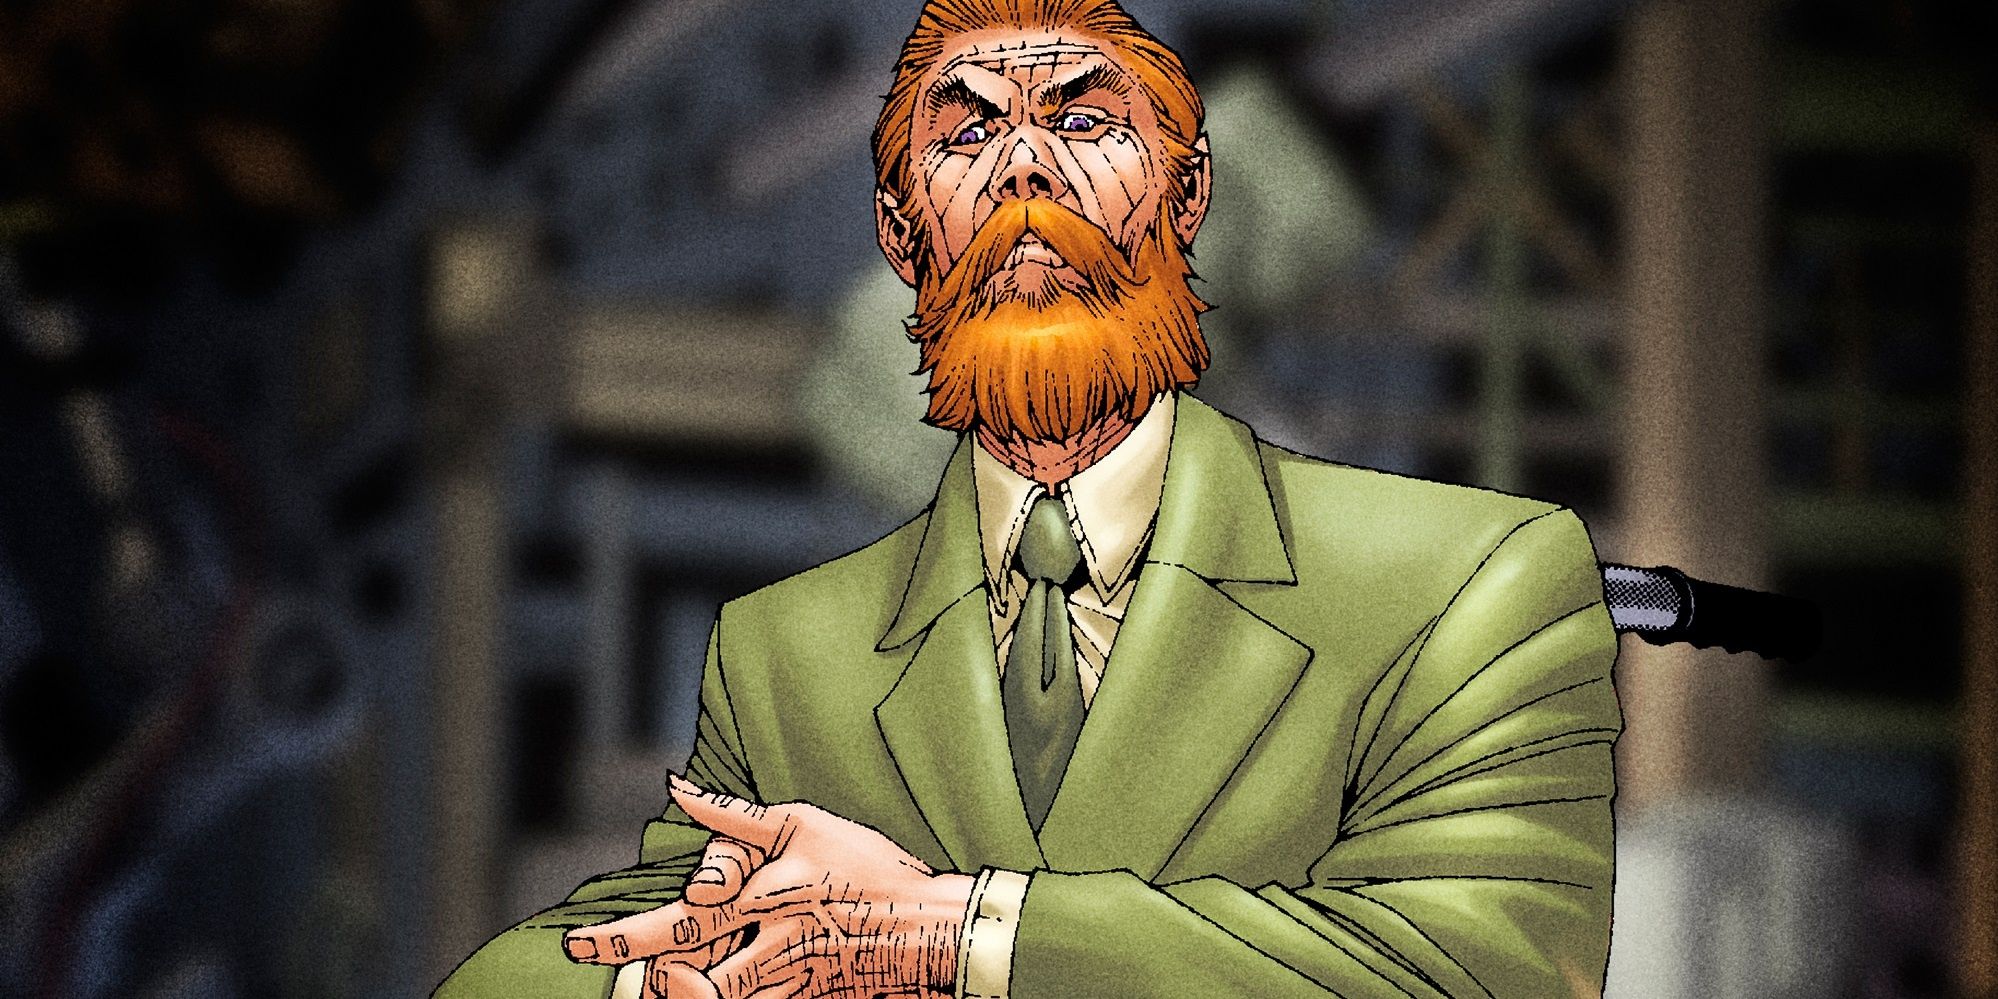 Niles Caulder scowling from his wheelchair in DC Comics' Doom Patrol